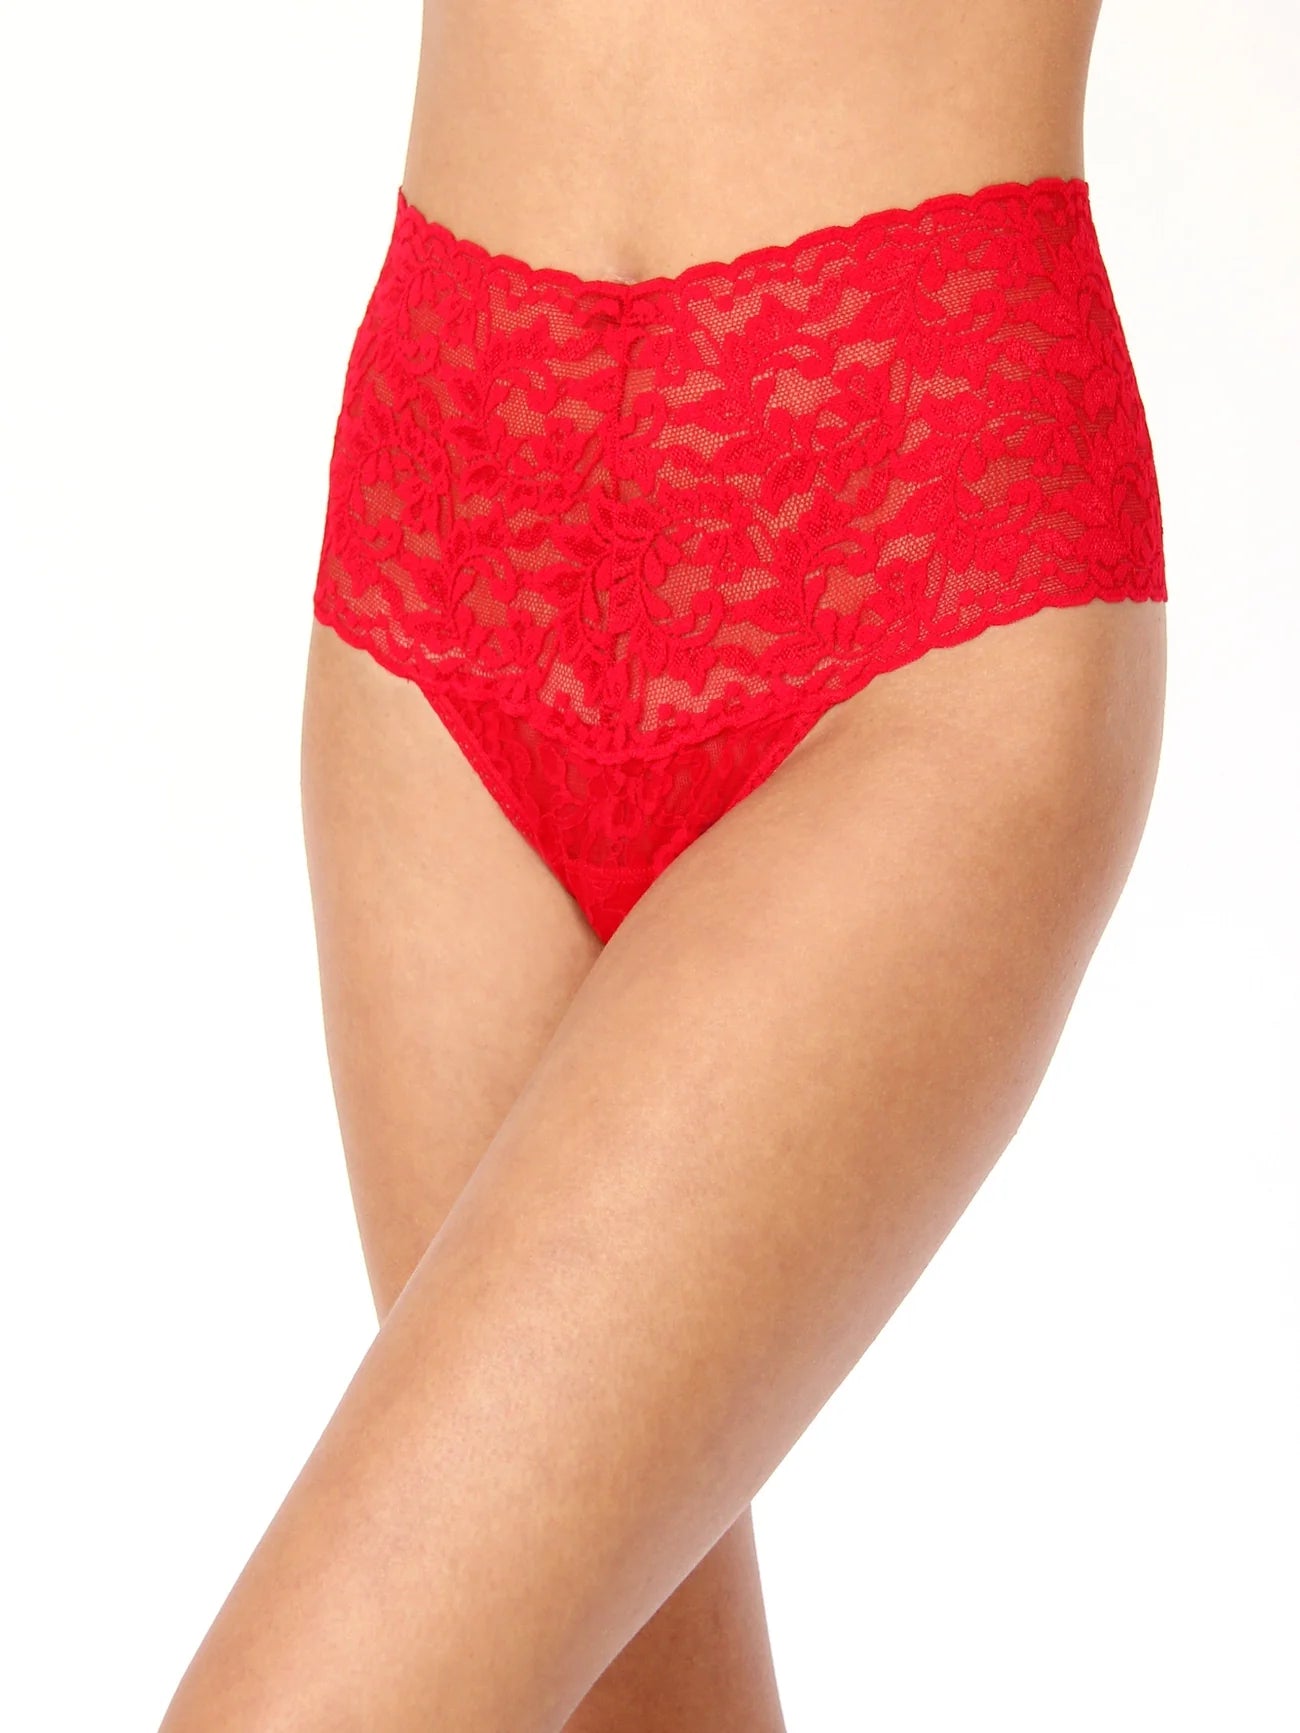 Romantic Corded Lace High-Waist Thong Panty in Red